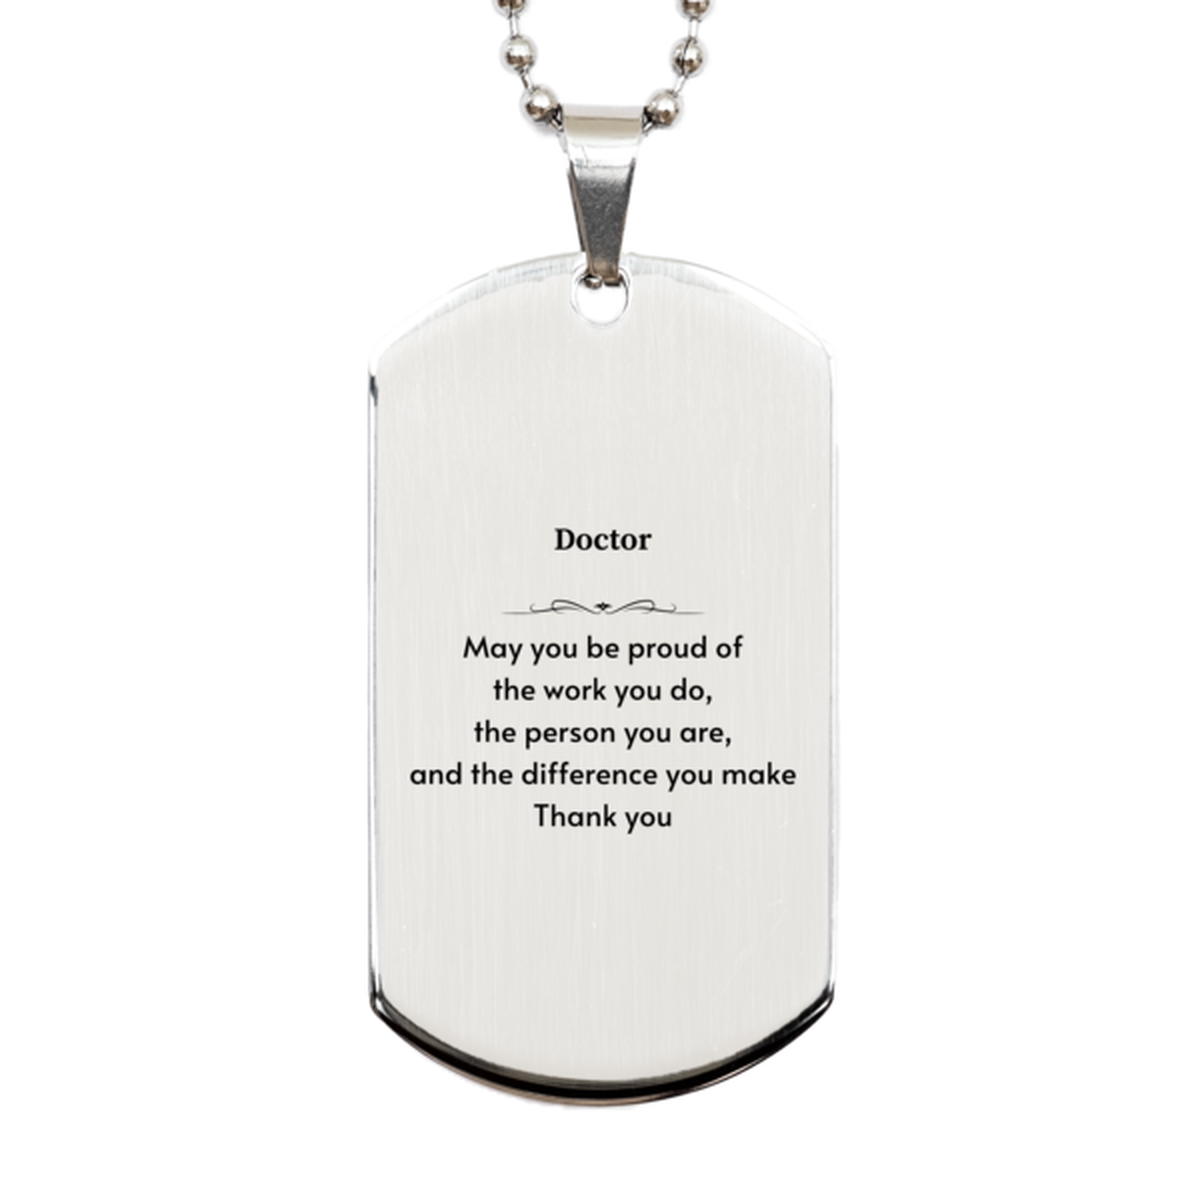 Heartwarming Silver Dog Tag Retirement Coworkers Gifts for Doctor, Doctor May You be proud of the work you do, the person you are Gifts for Boss Men Women Friends